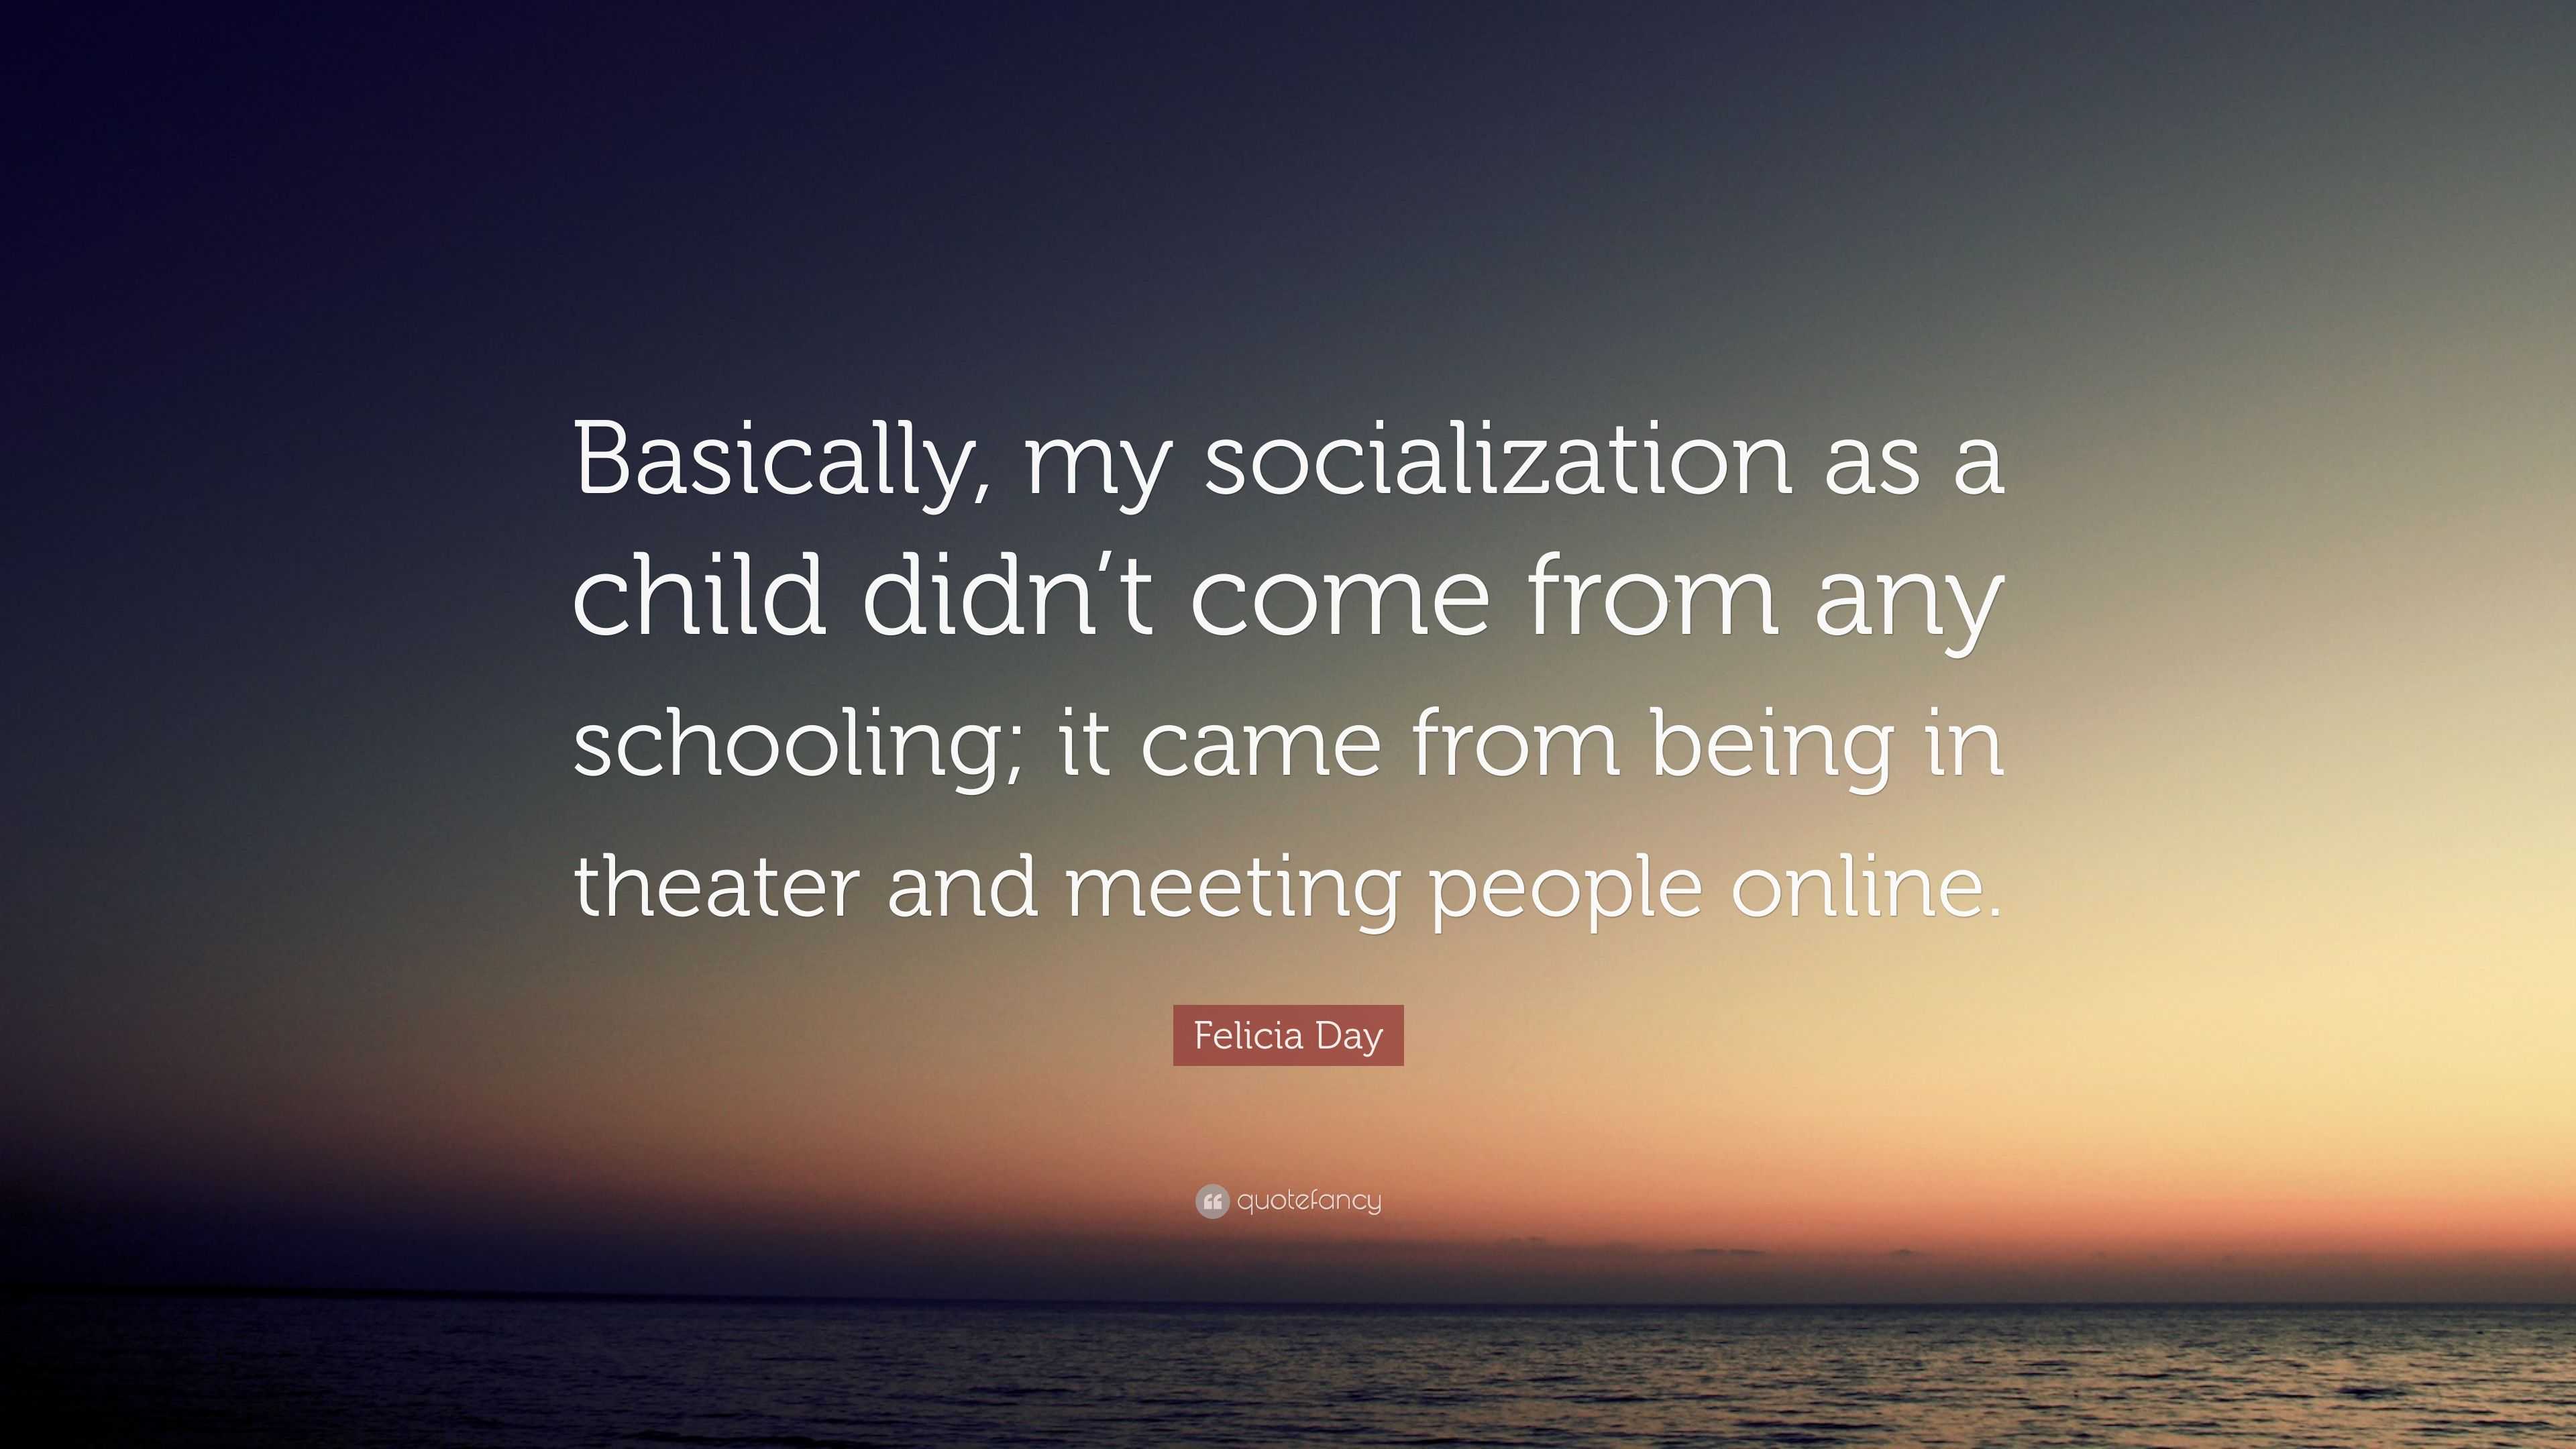 Felicia Day Quote: “Basically, my socialization as a child didn’t come